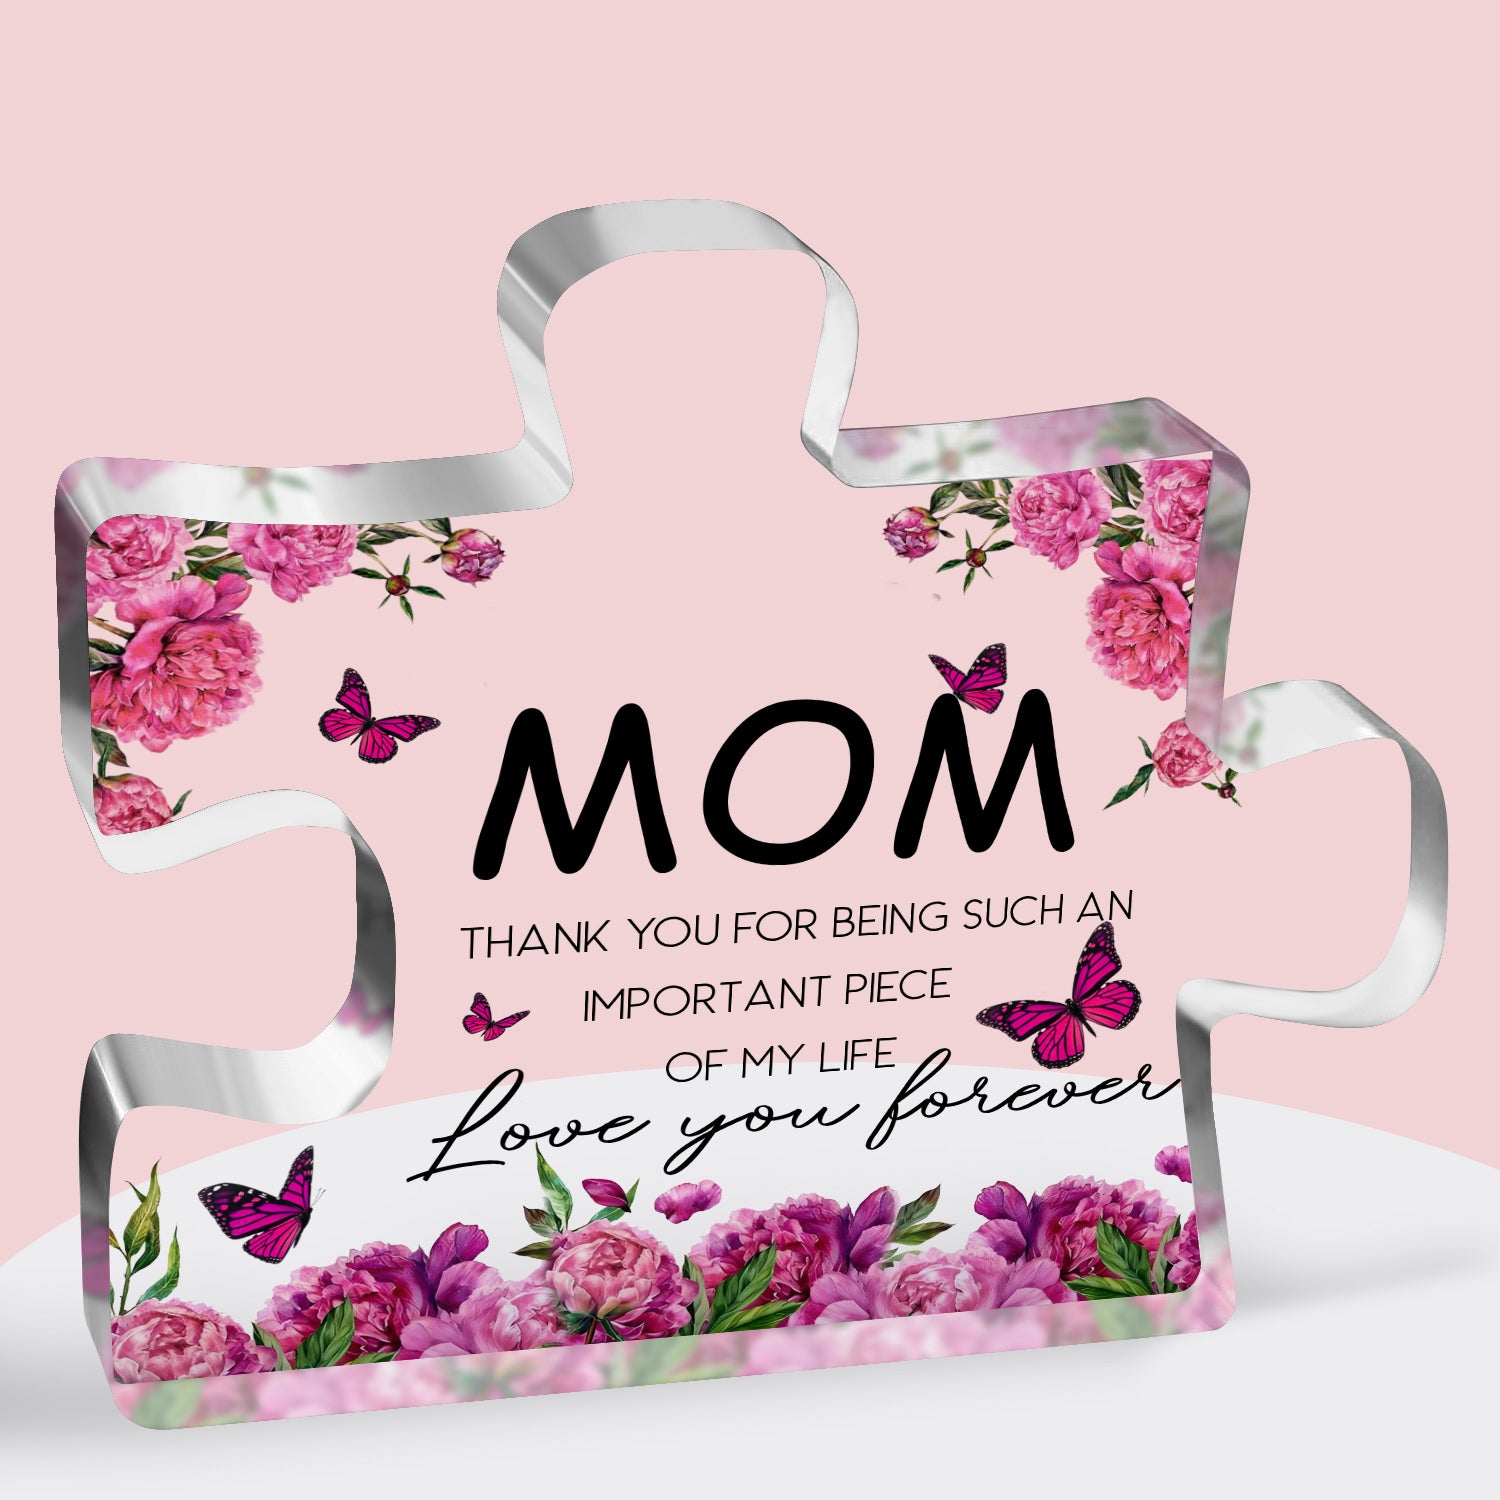 Gifts for Mom Thank You Acrylic Plaque Block Puzzle Mothers Day Thanksgiving Birthday Gifts for Mom